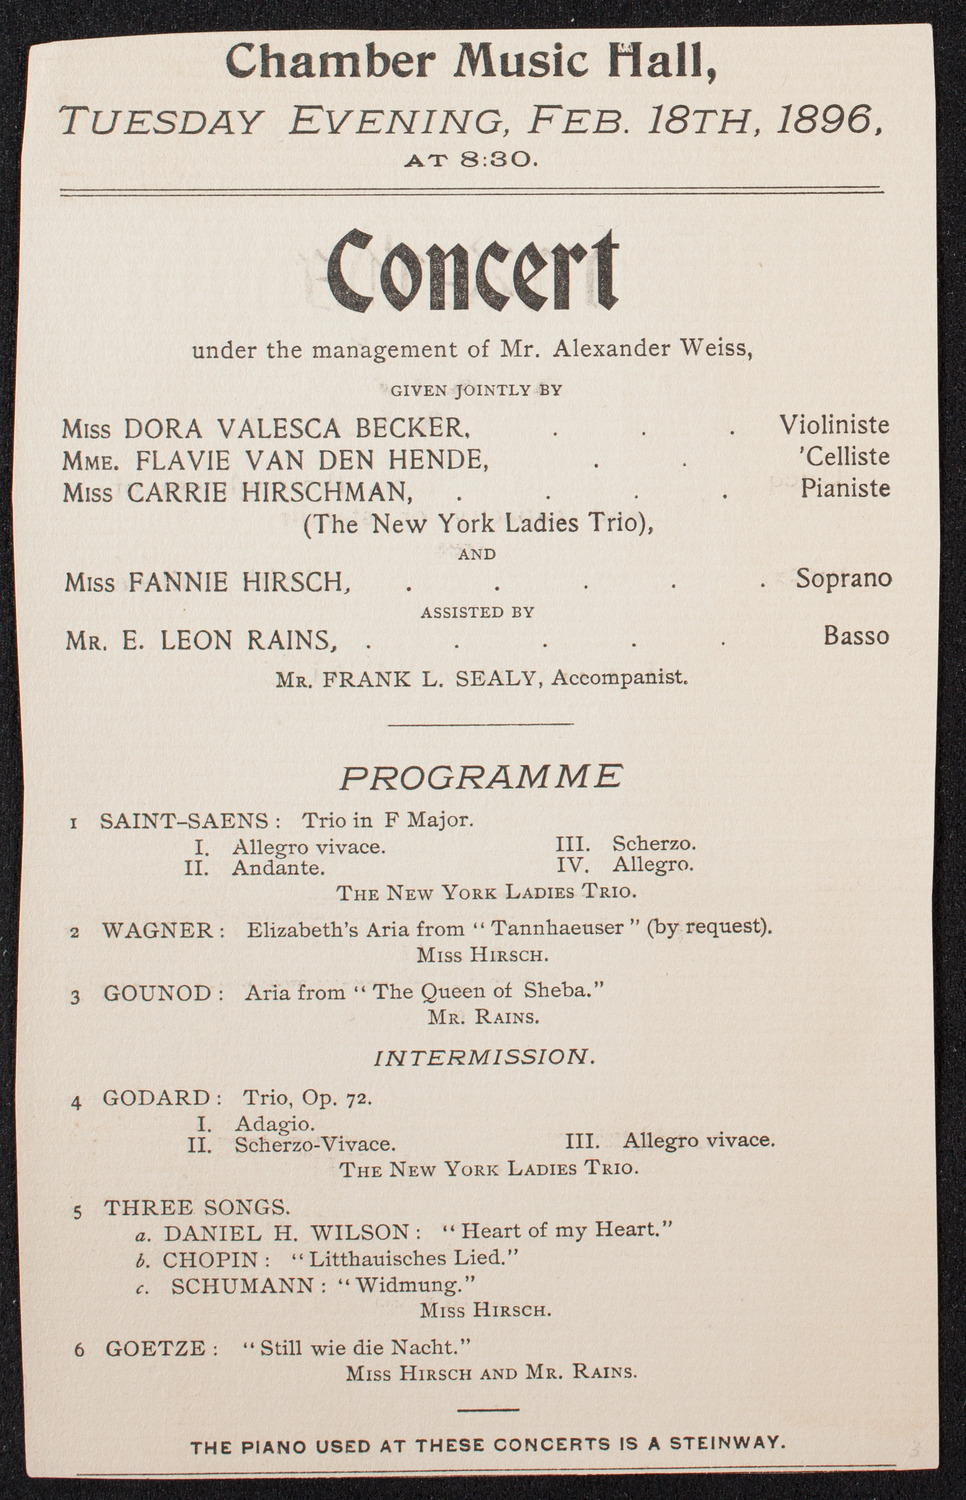 The New York Ladies Trio and Fannie Hirsch, February 18, 1896, program page 1